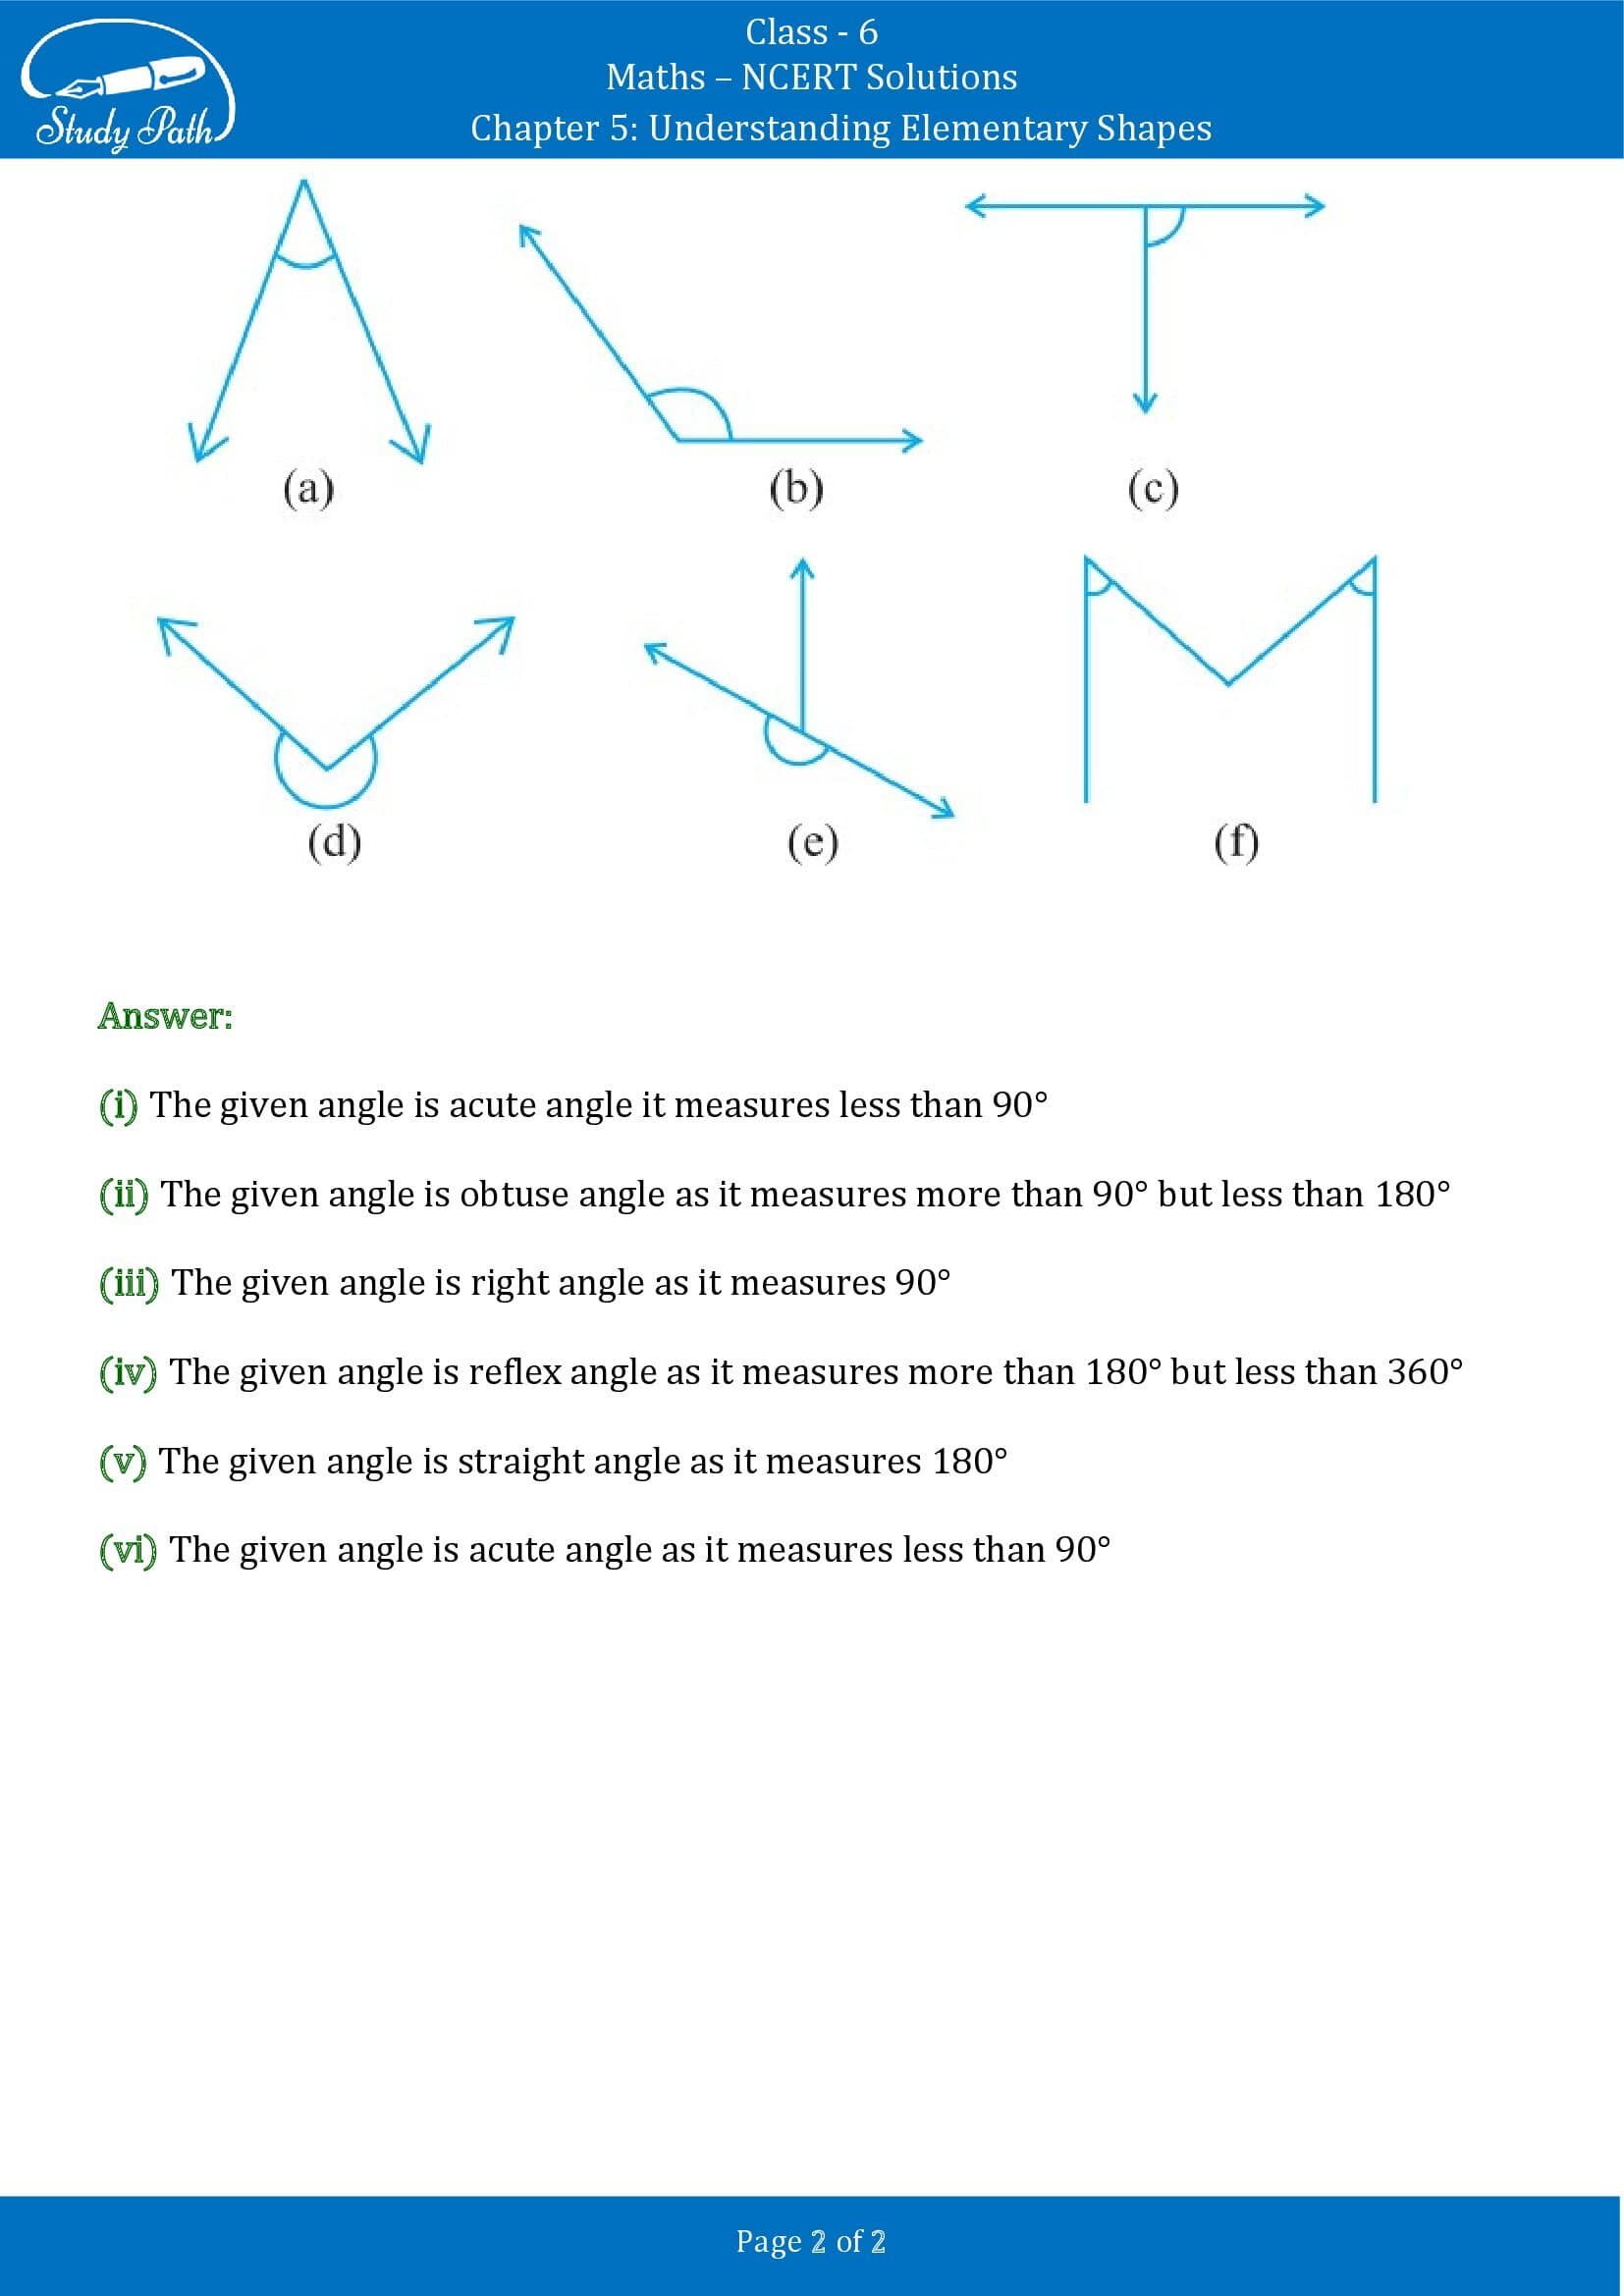 NCERT Solutions for Class 6 Maths Chapter 5 Understanding Elementary Shapes Exercise 5.3 00002